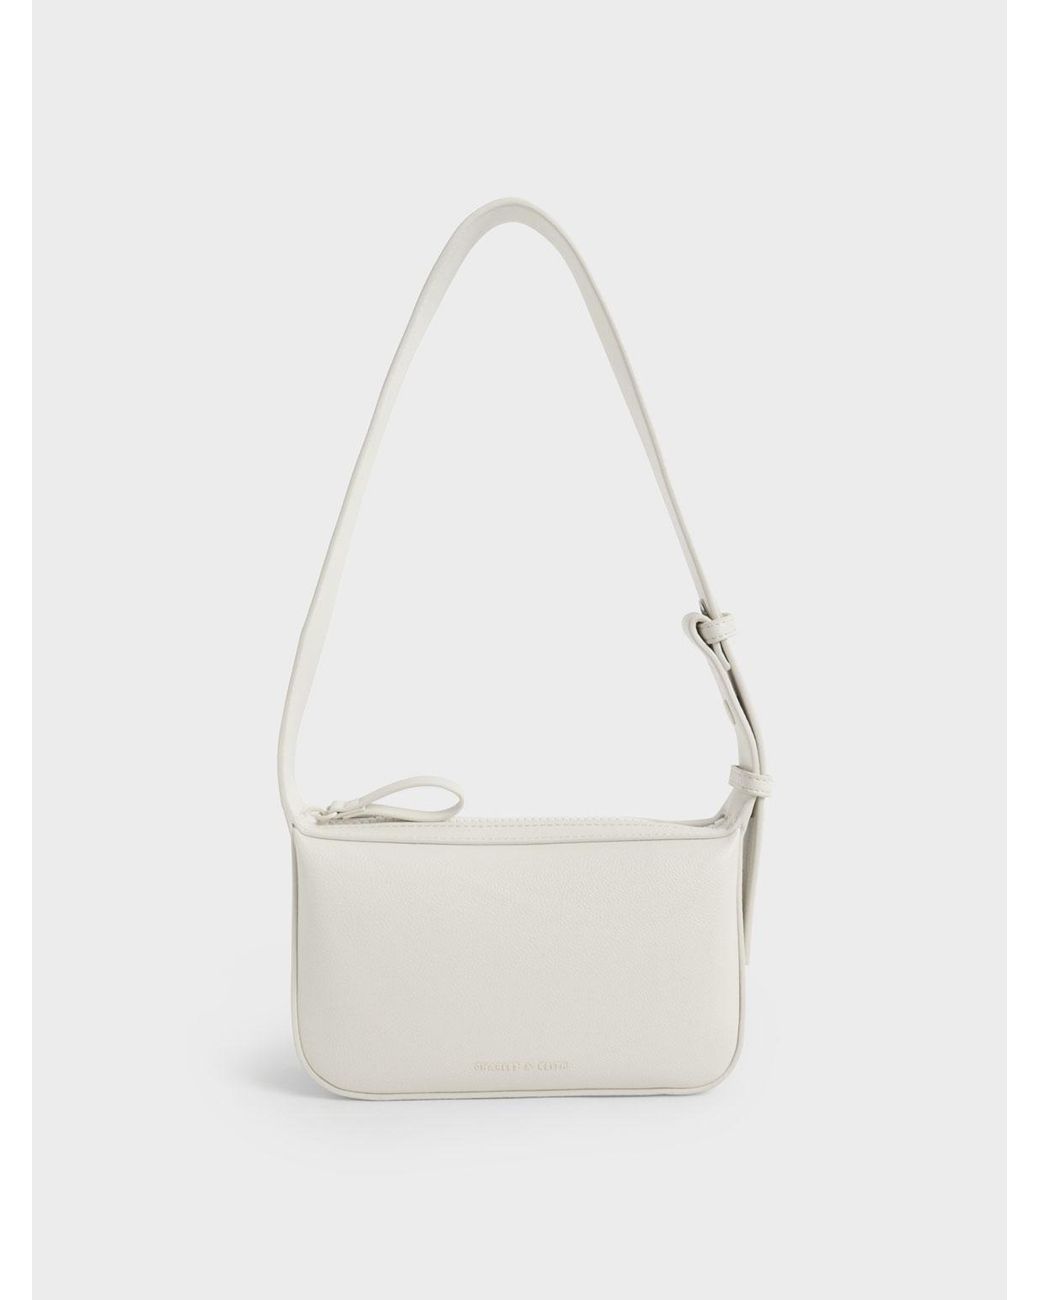 Charles & Keith Boxy Shoulder Bag in White